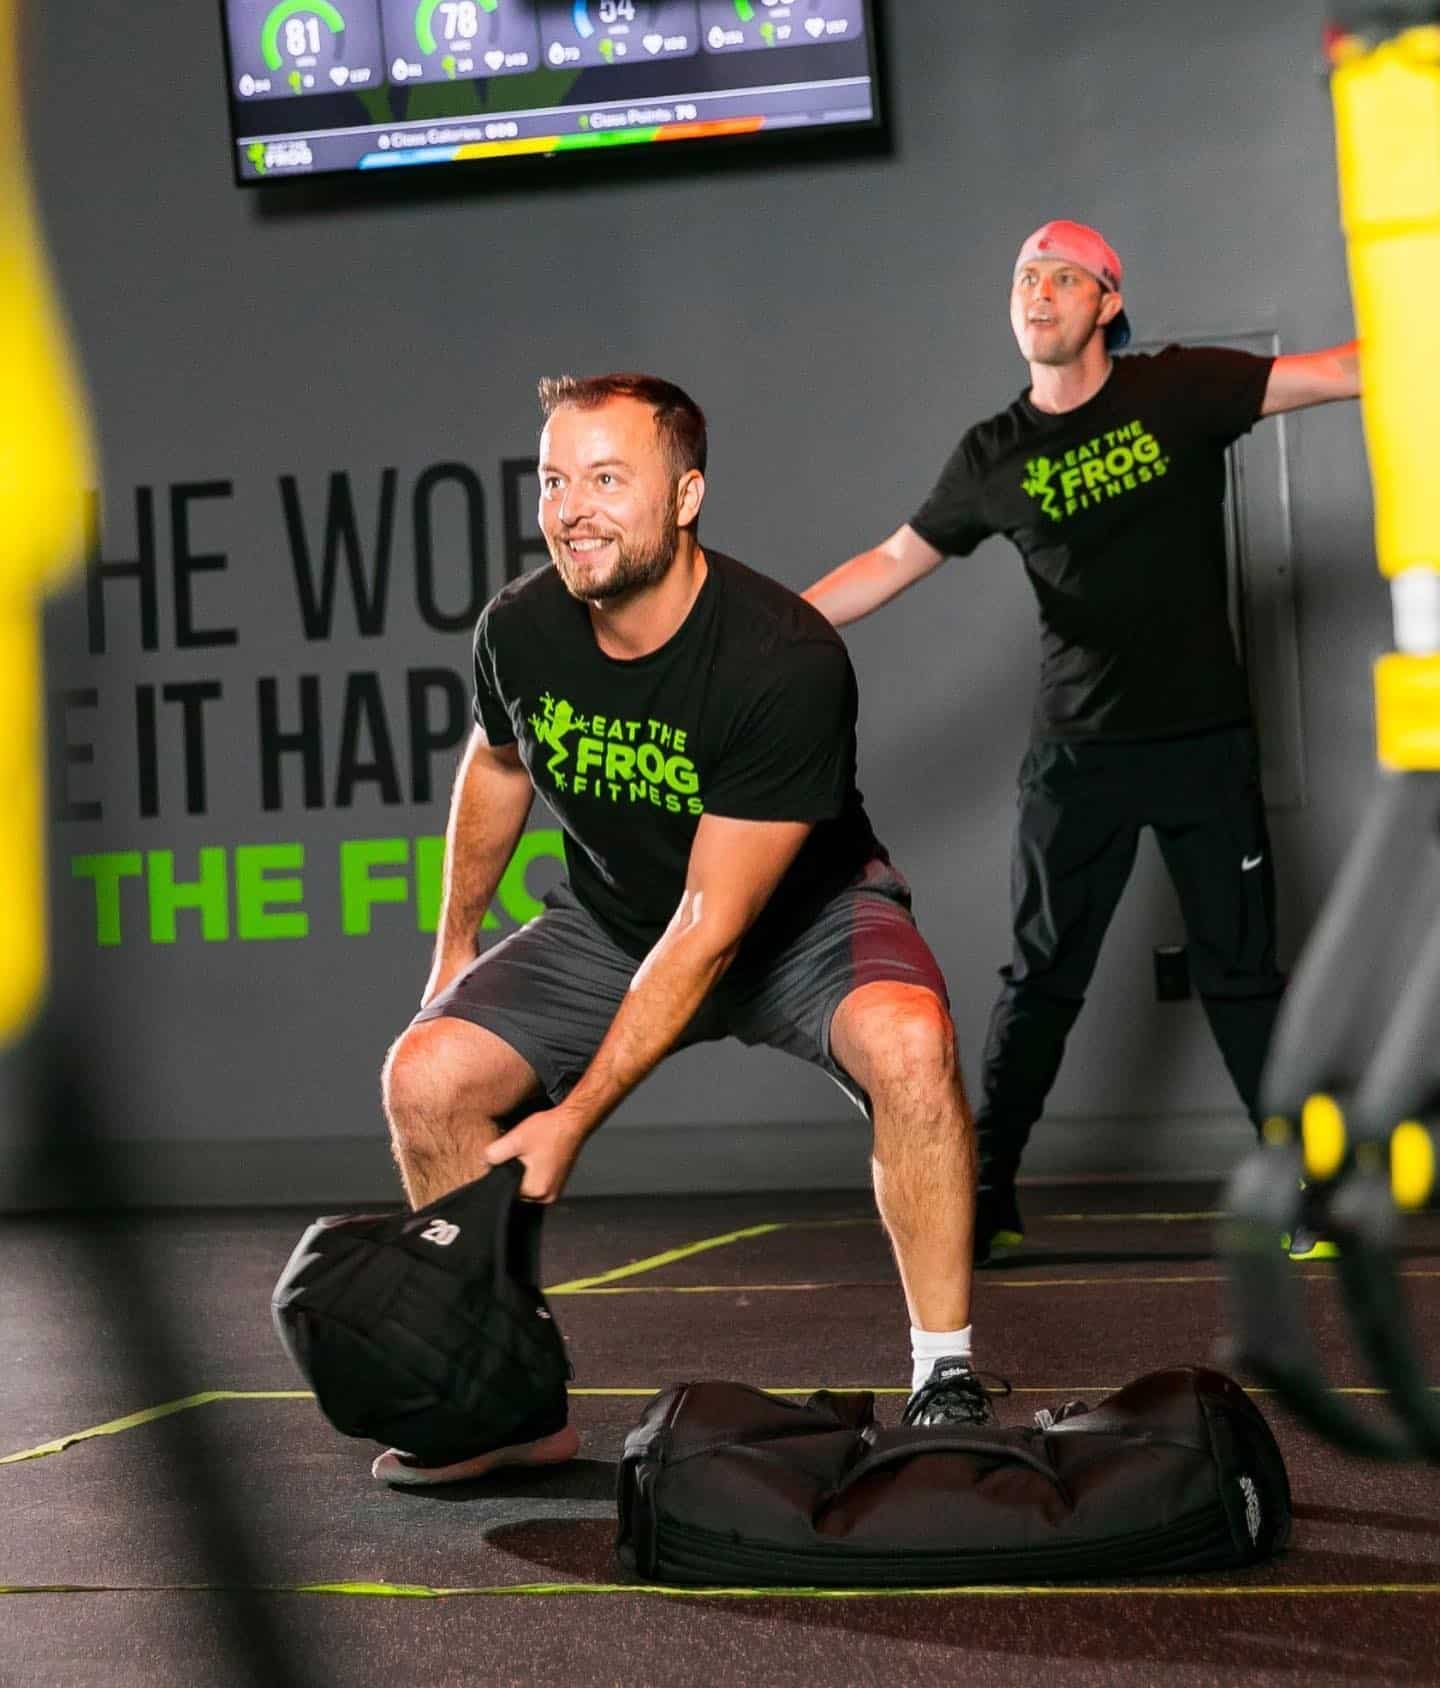 Eat The Frog Fitness is a technology-infused training studio personalized to help you achieve your health and fitness goals.

🏻 Want to give it a try? Lucky for you, your first workout is free! Follow @eatthefrog_charlotte and book your first class!